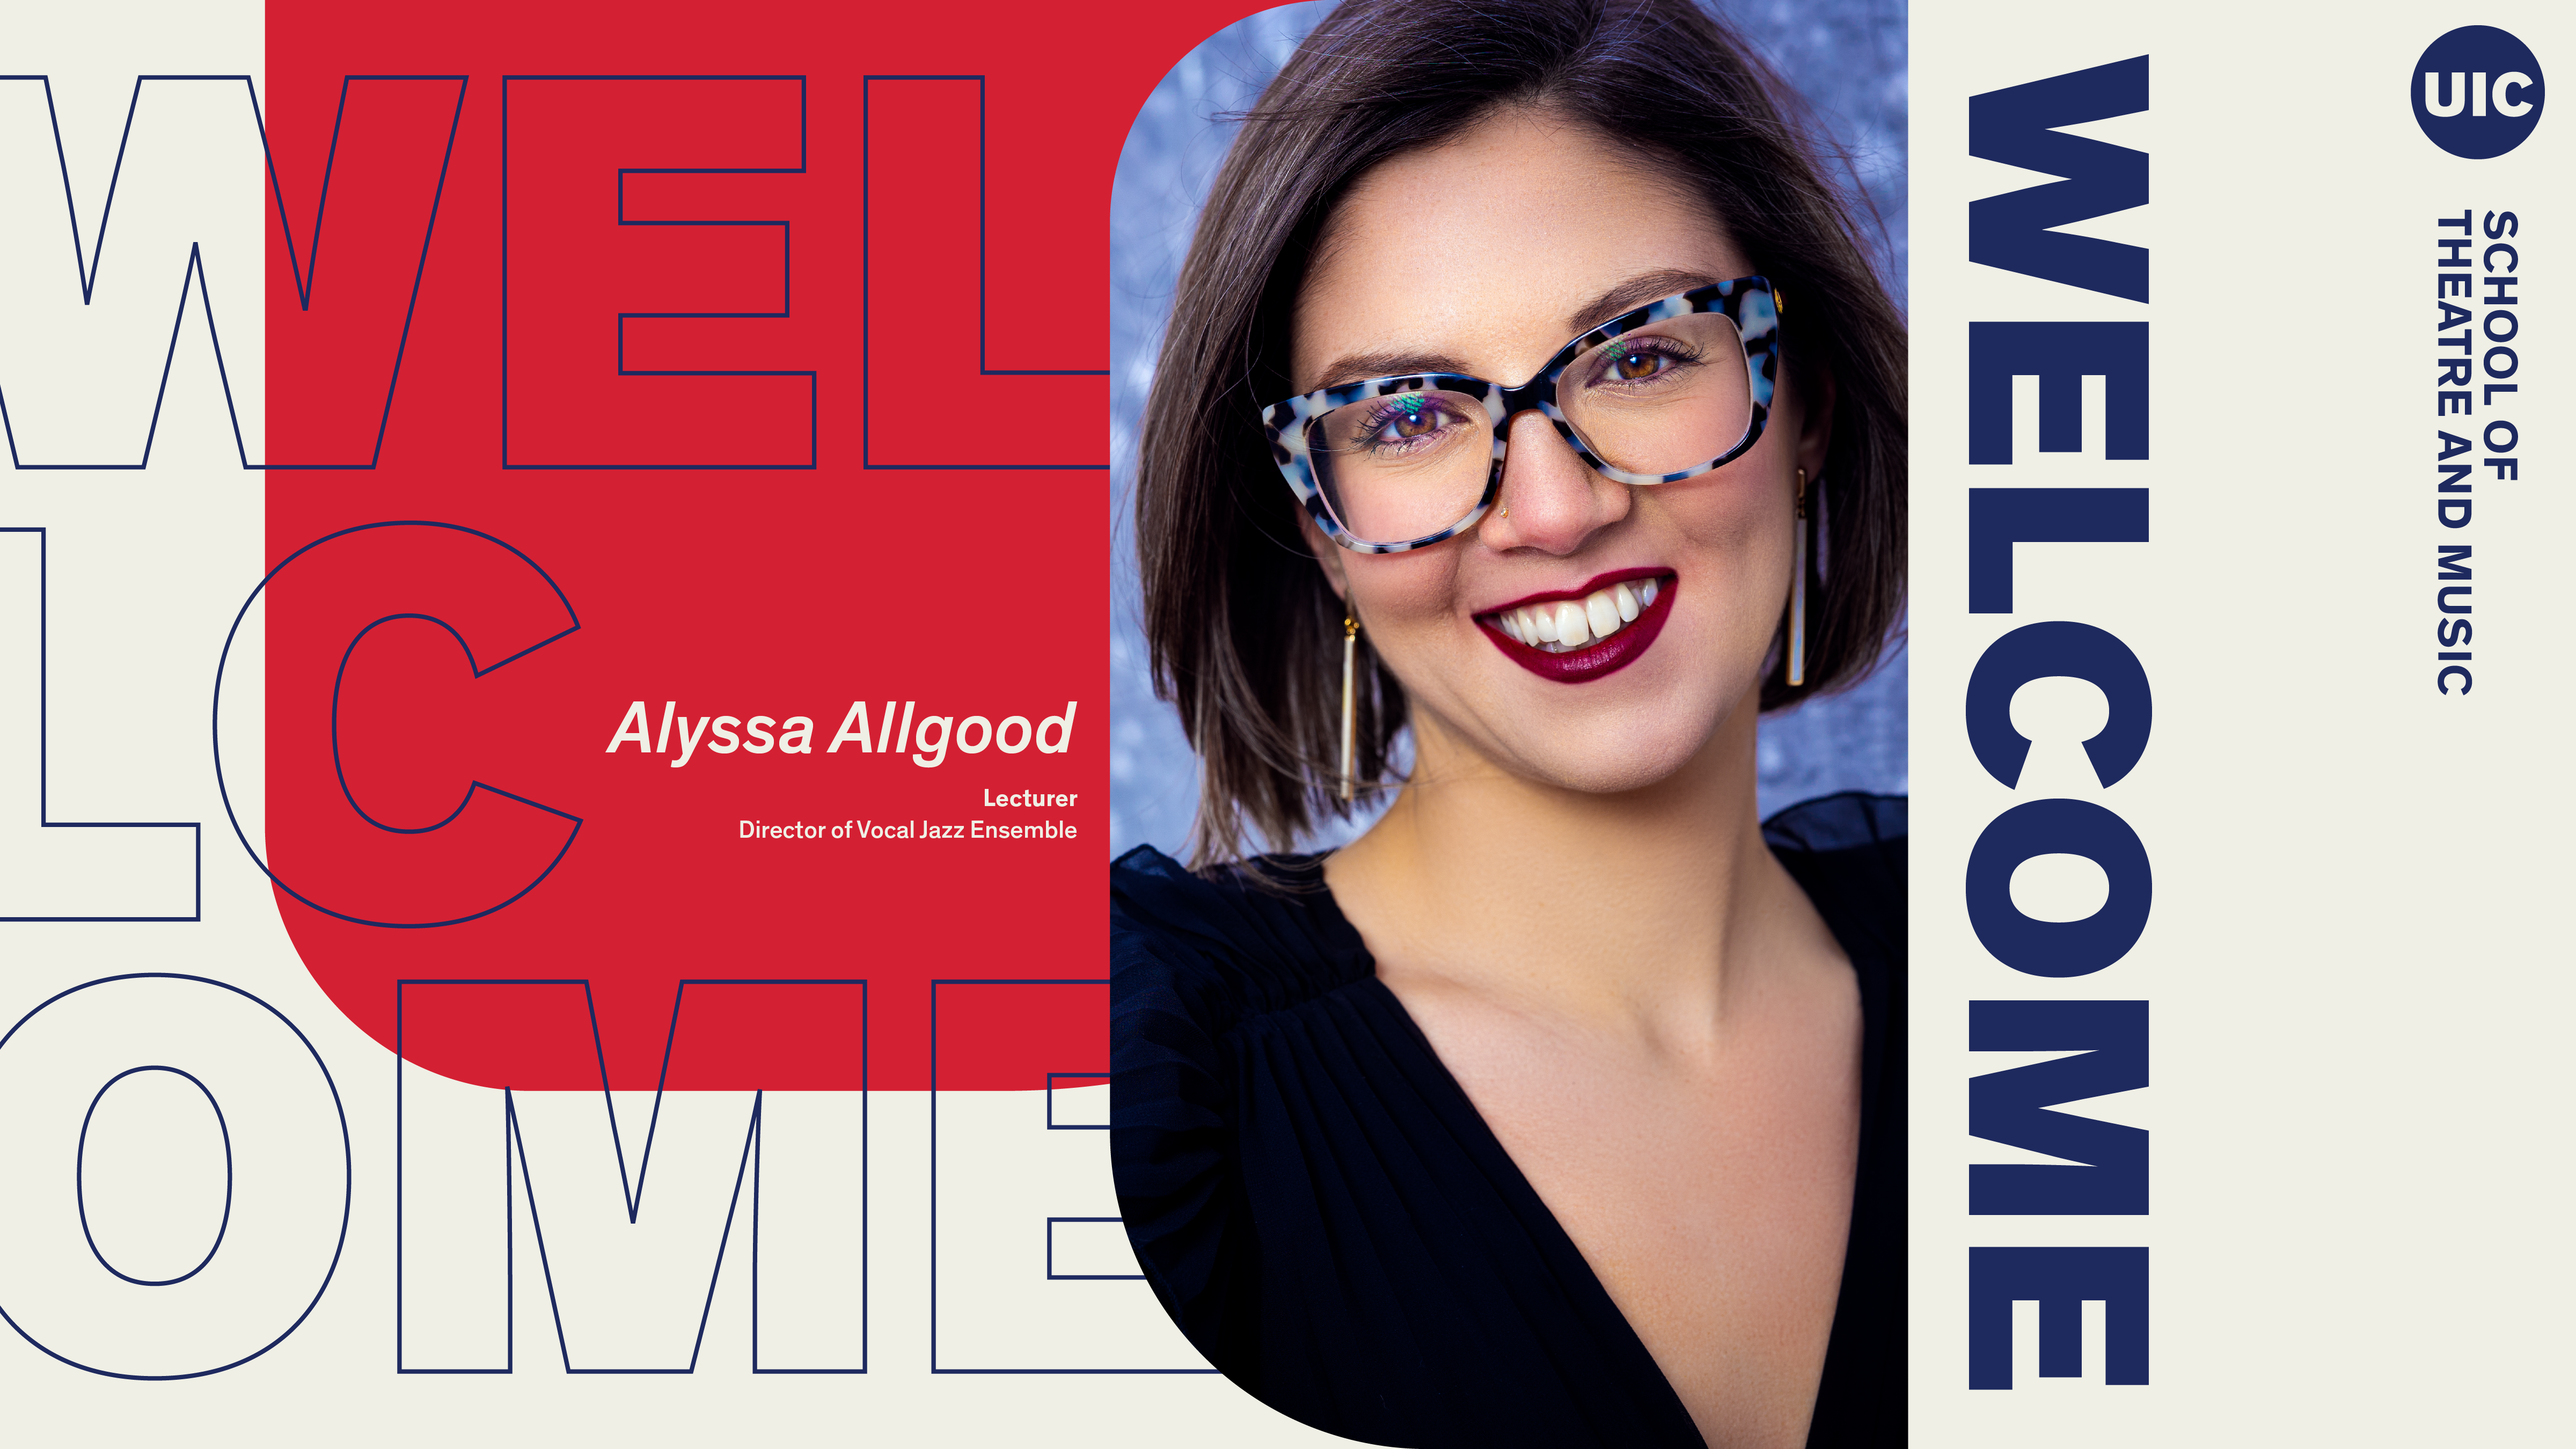 School of Theatre and Music welcomes Alyssa Allgood